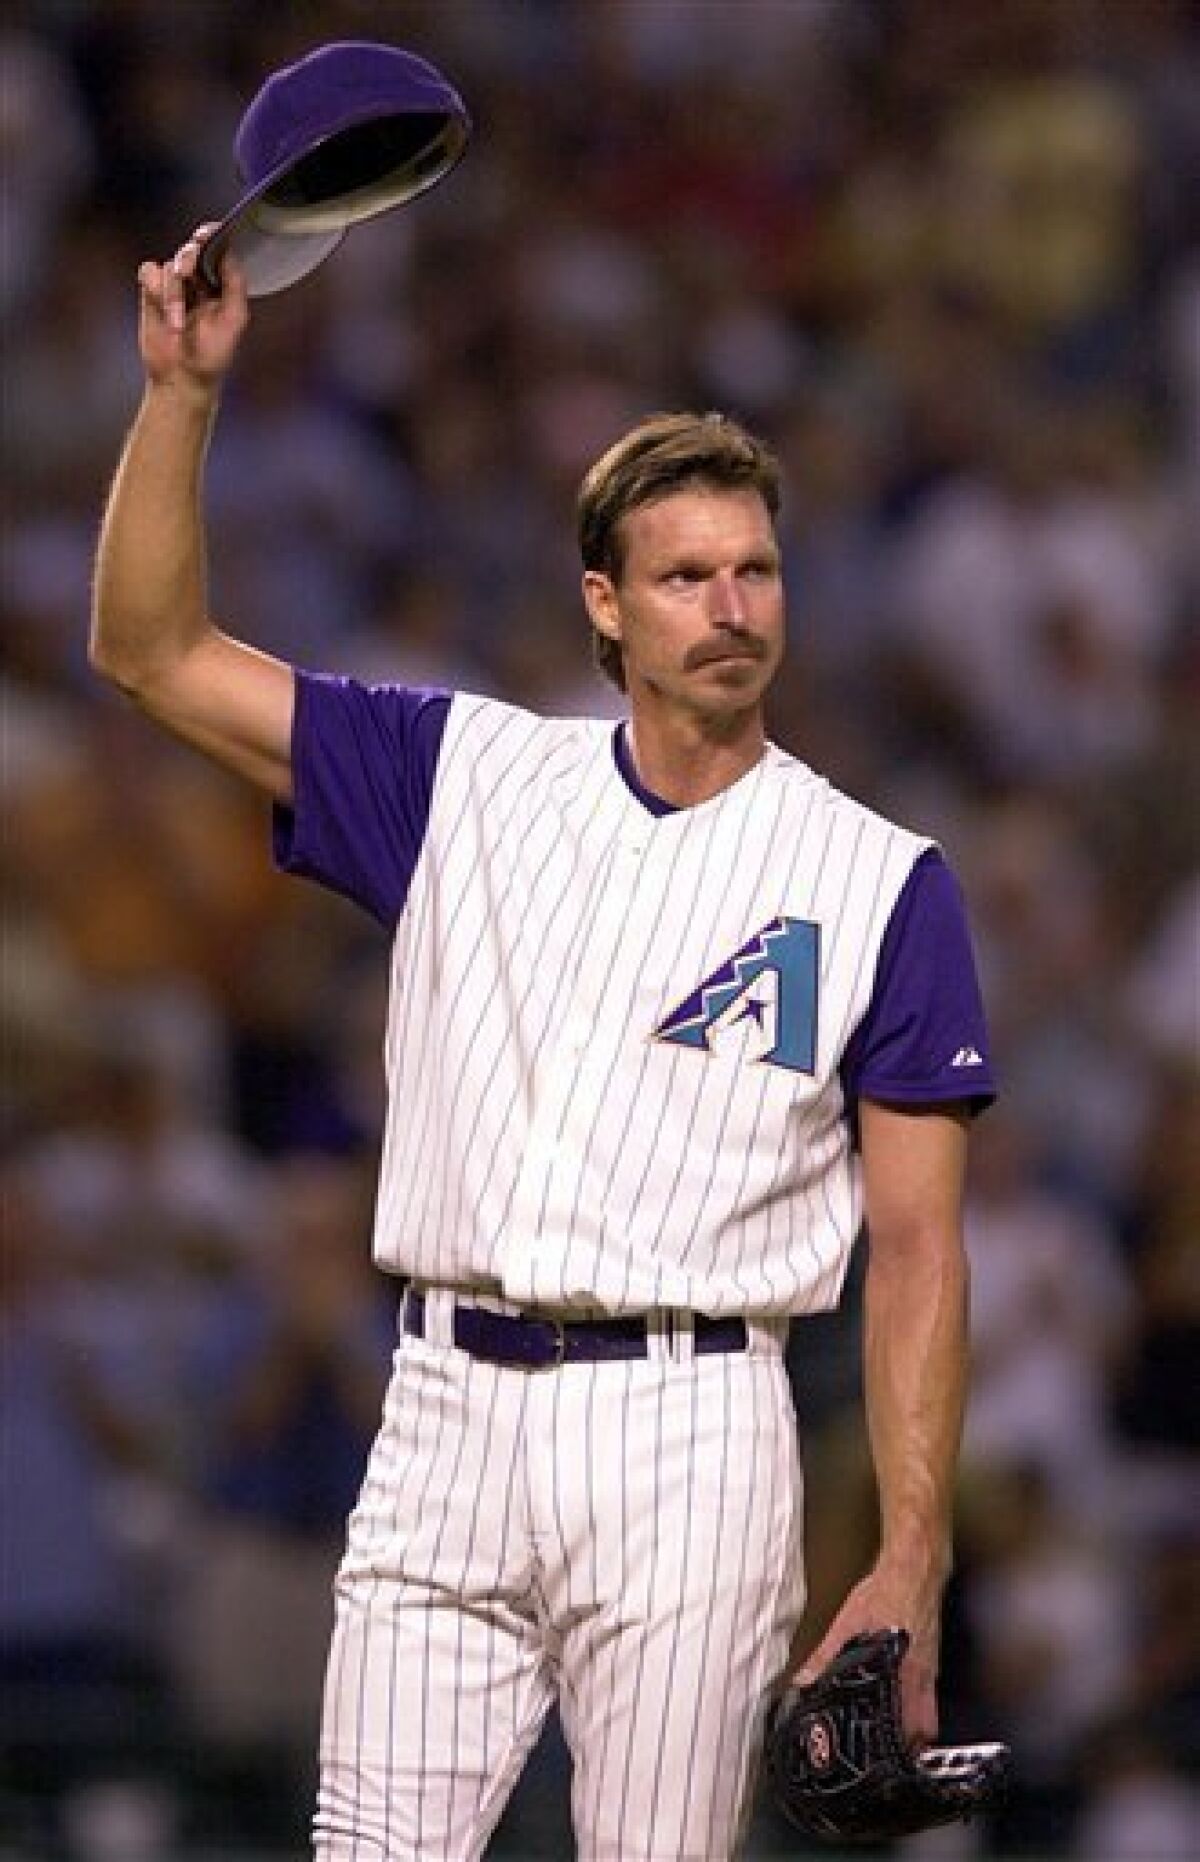 One Of The Finest Pitcher, Randy Johnson